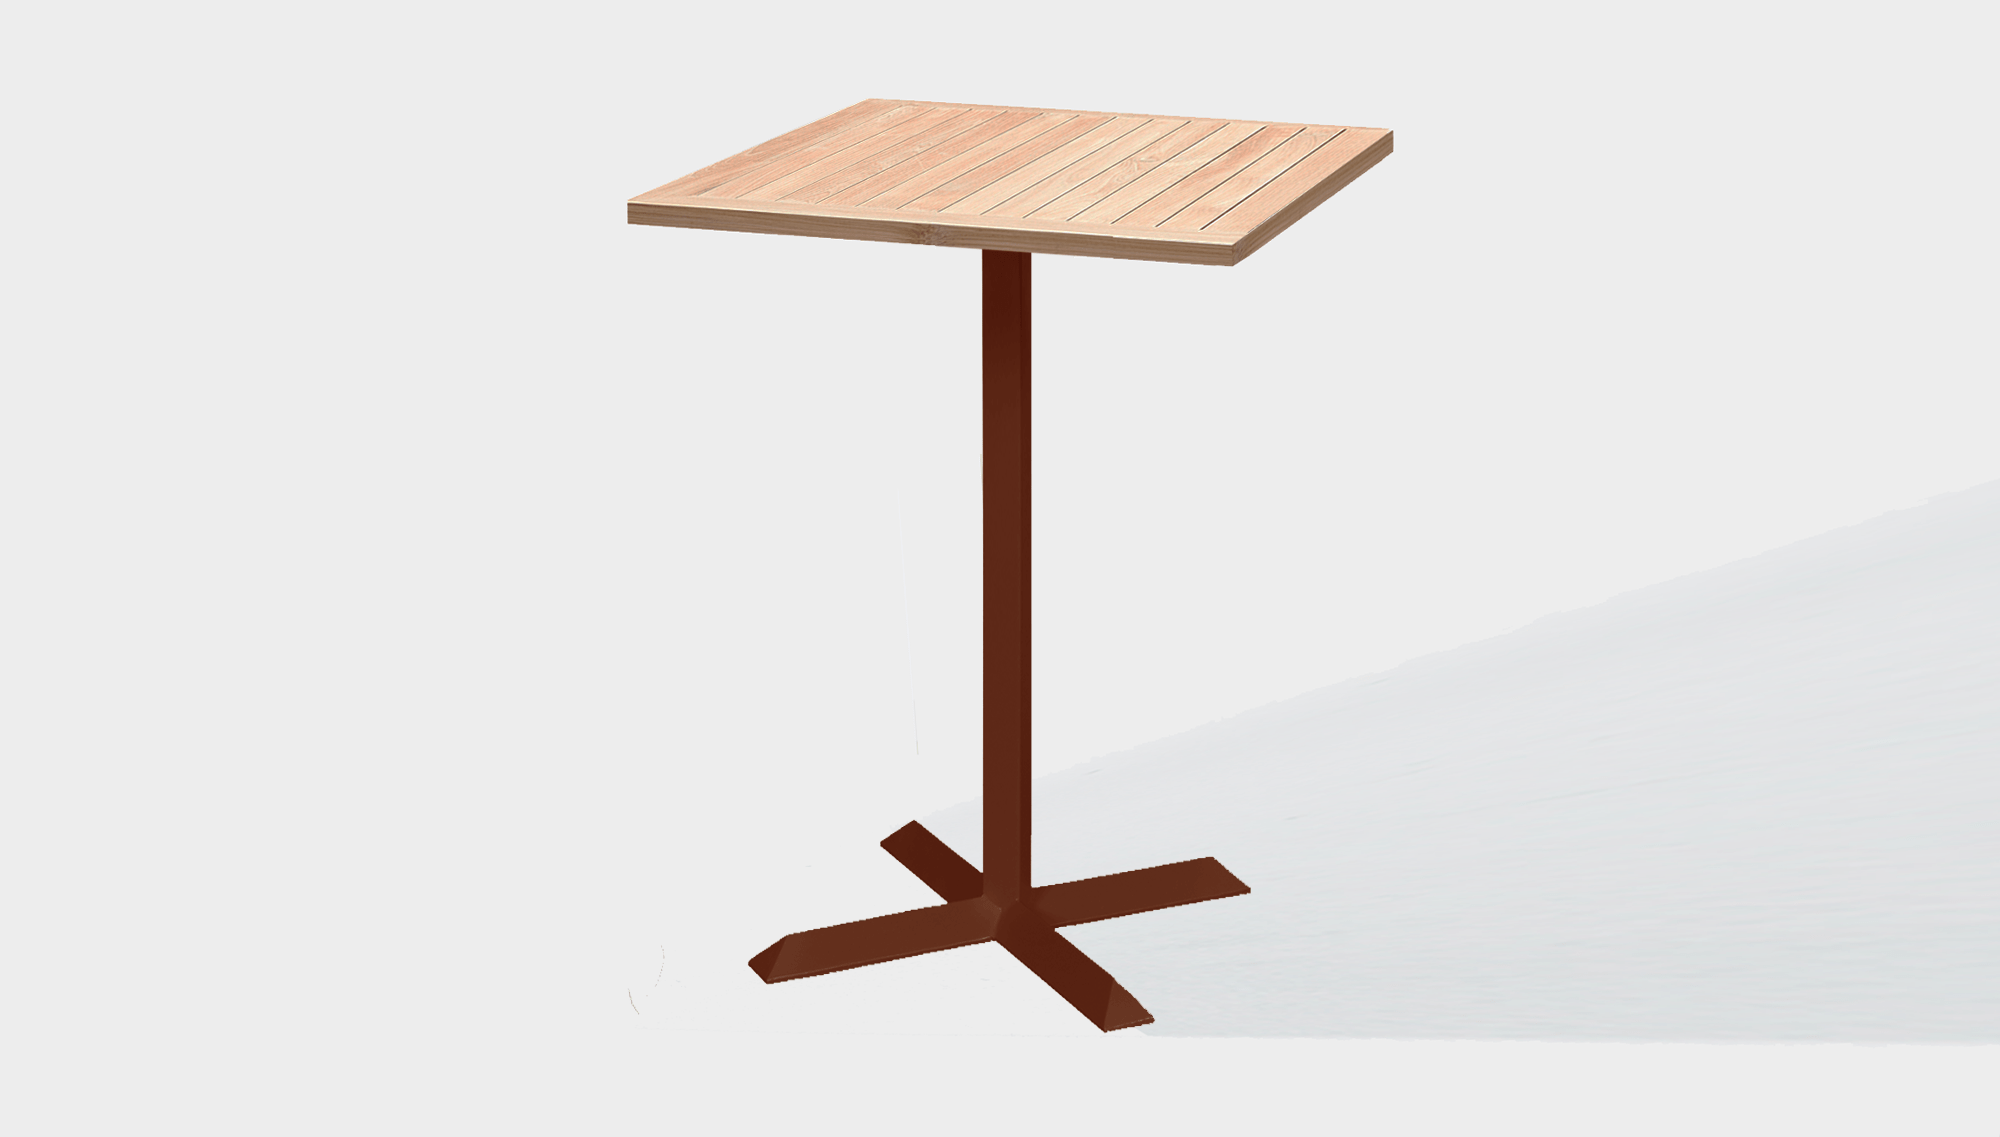 reddie-raw outdoor square dining table 60 x 60 x 100H*cm / Solid Reclaimed Wood Teak~Natural / Metal~Rust Andi Outdoor Square Cafe/Bar Table (2 heights)